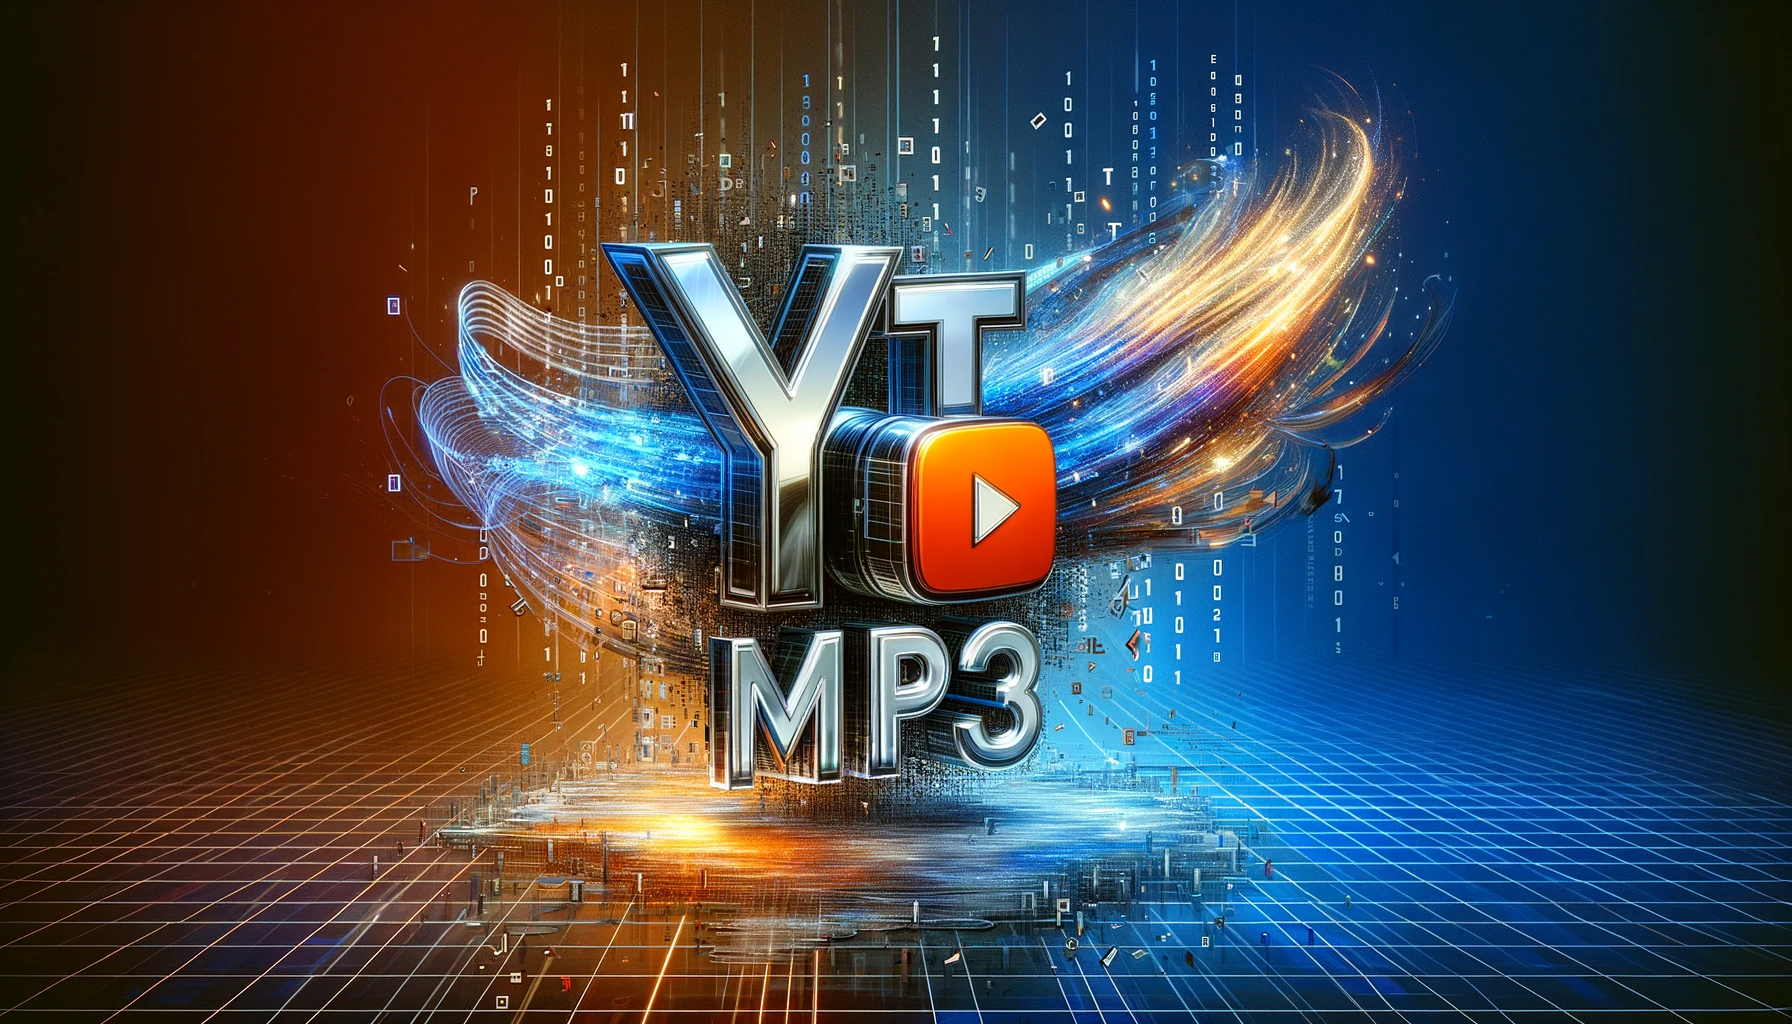 Enhancing Your Audio Experience with YT to MP3 Conversion